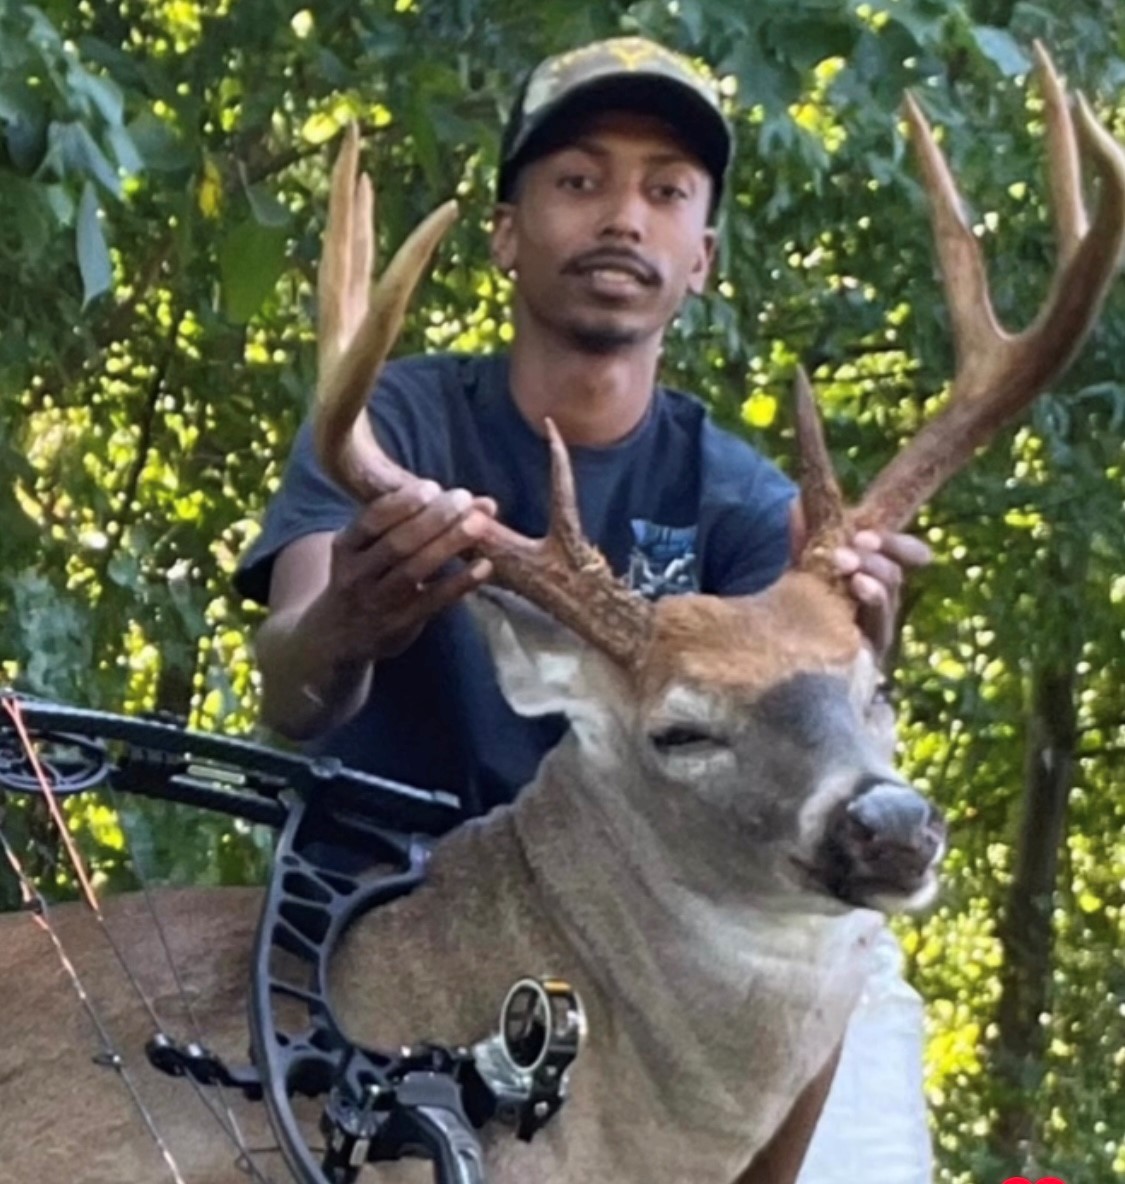 Congrats to @whitetailthugzoutdoors as he is back at it again this year with another early season brute of a buck.' - @northcarolina.outdoorsman #ITSINOURBLOOD #IAMSPORTSMAN #hunting #deer #deerhunting #whitetails #whitetailhunting #whitetailbuck #northcarolina